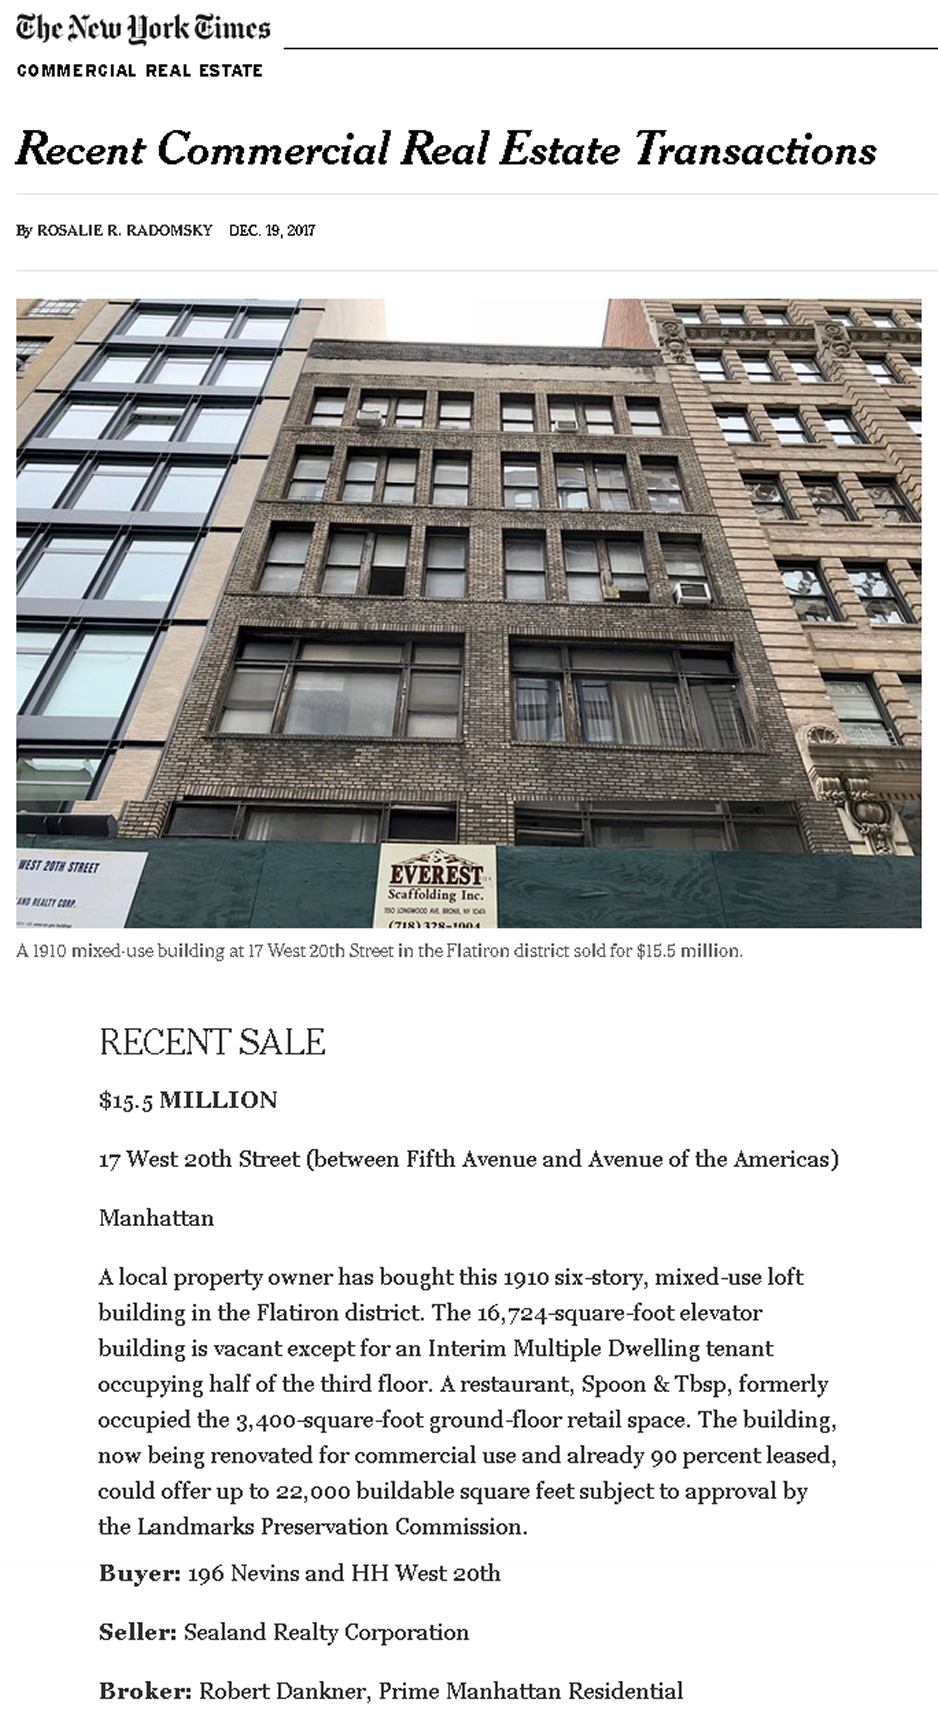 Recent Commercial Real Estate Transactions in Manhattan part 1